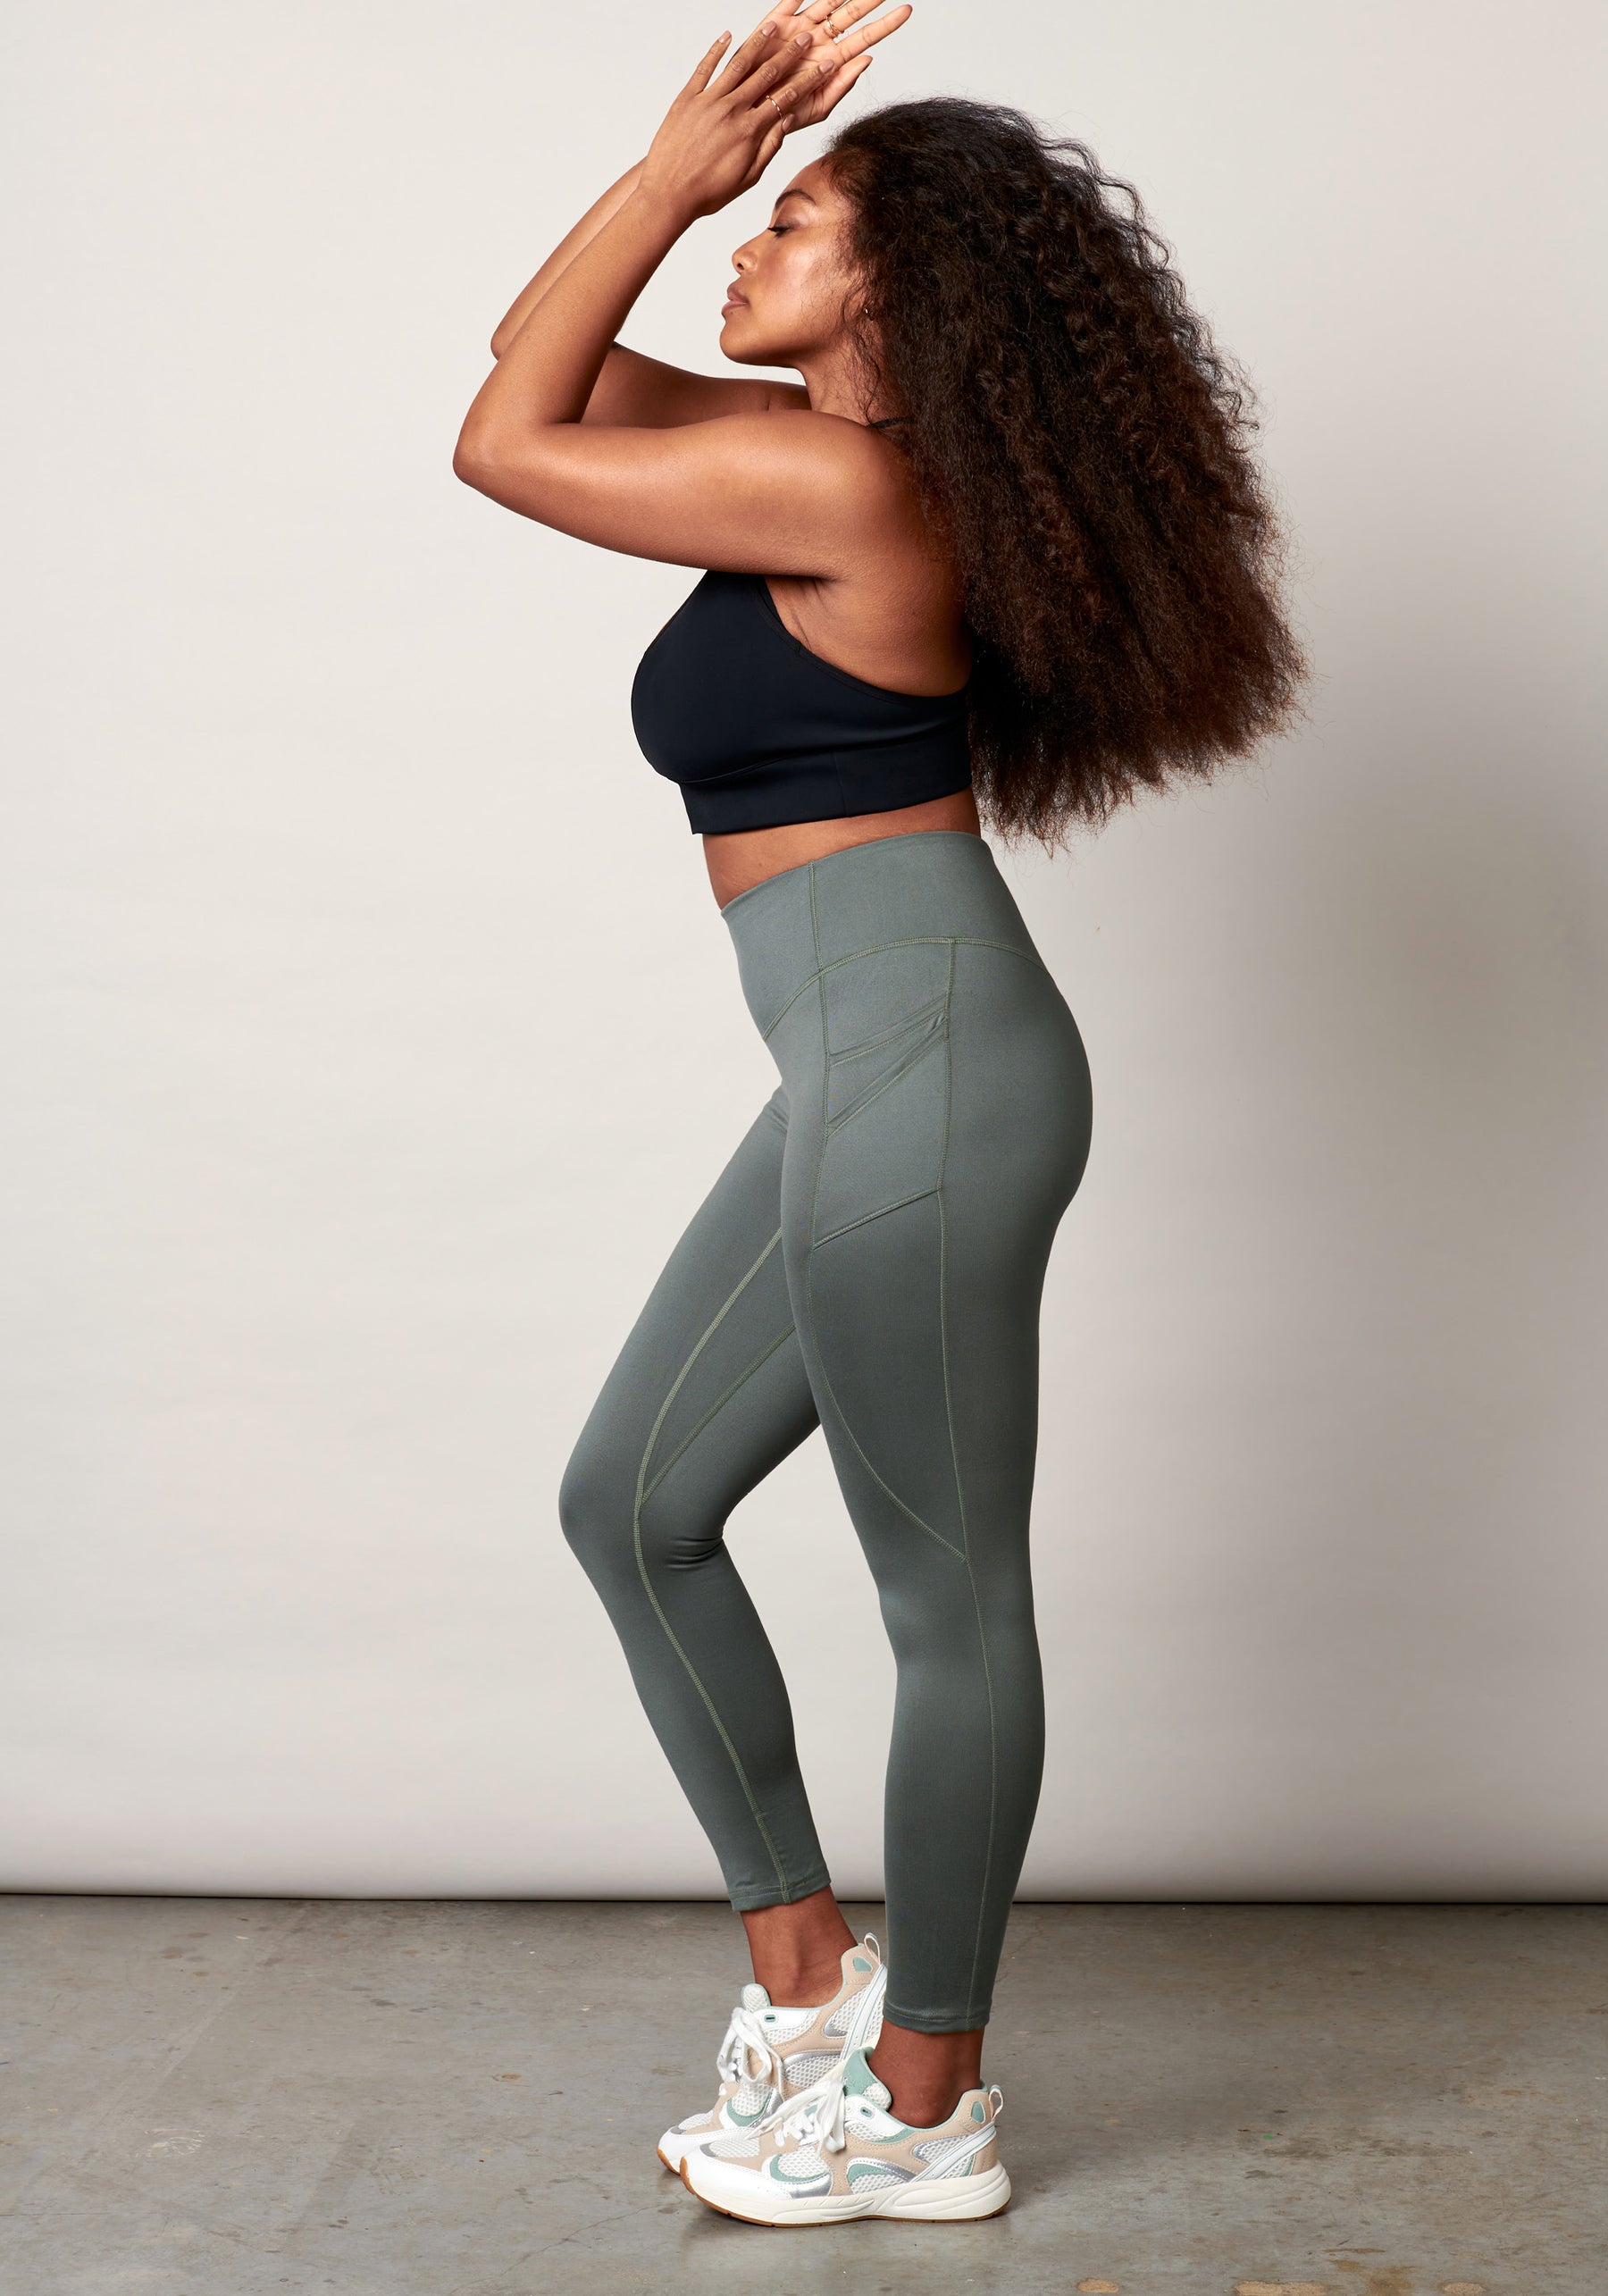 Pact Purefit Pocket Legging Made With Organic Cotton - Macy's